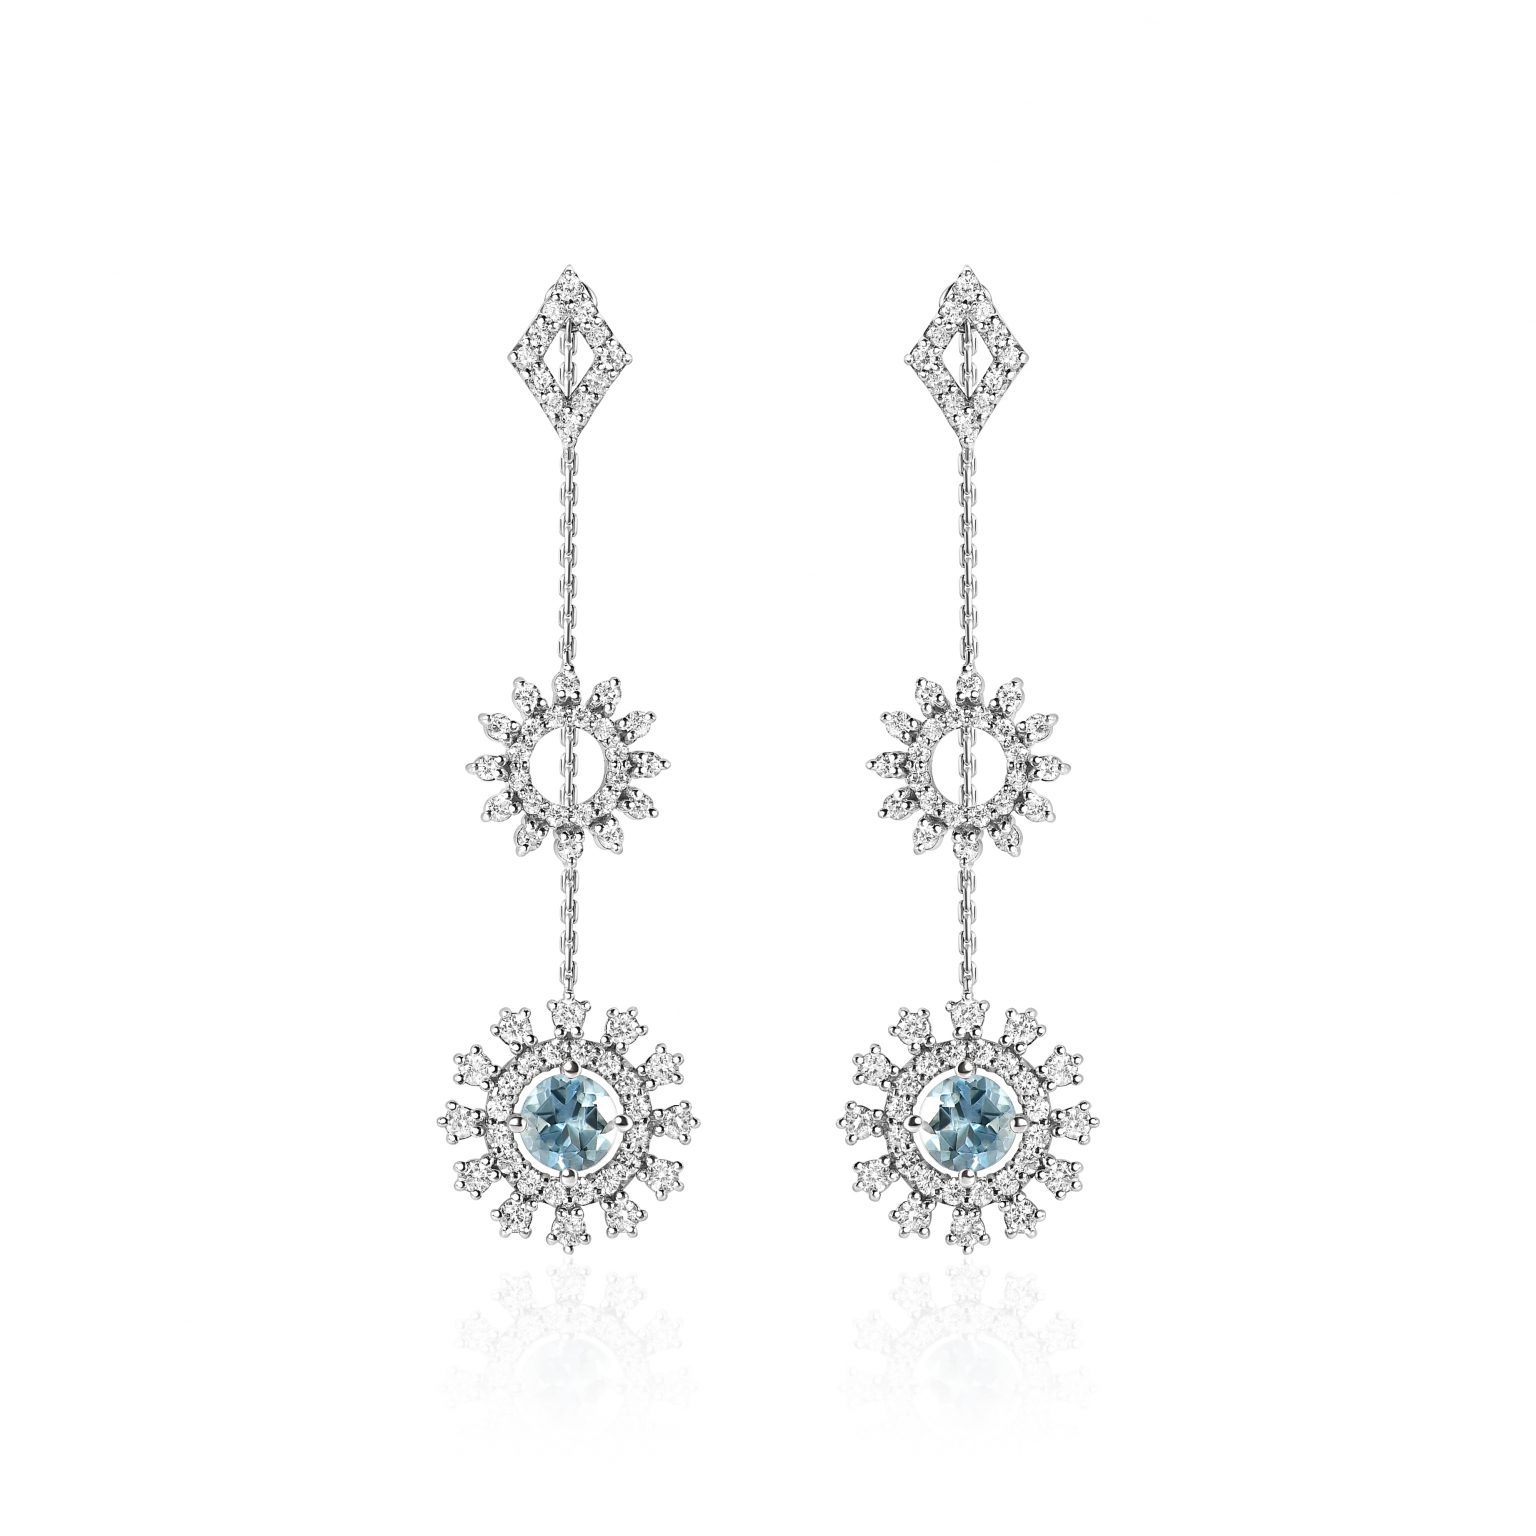 Earrings with aquamarines and diamonds